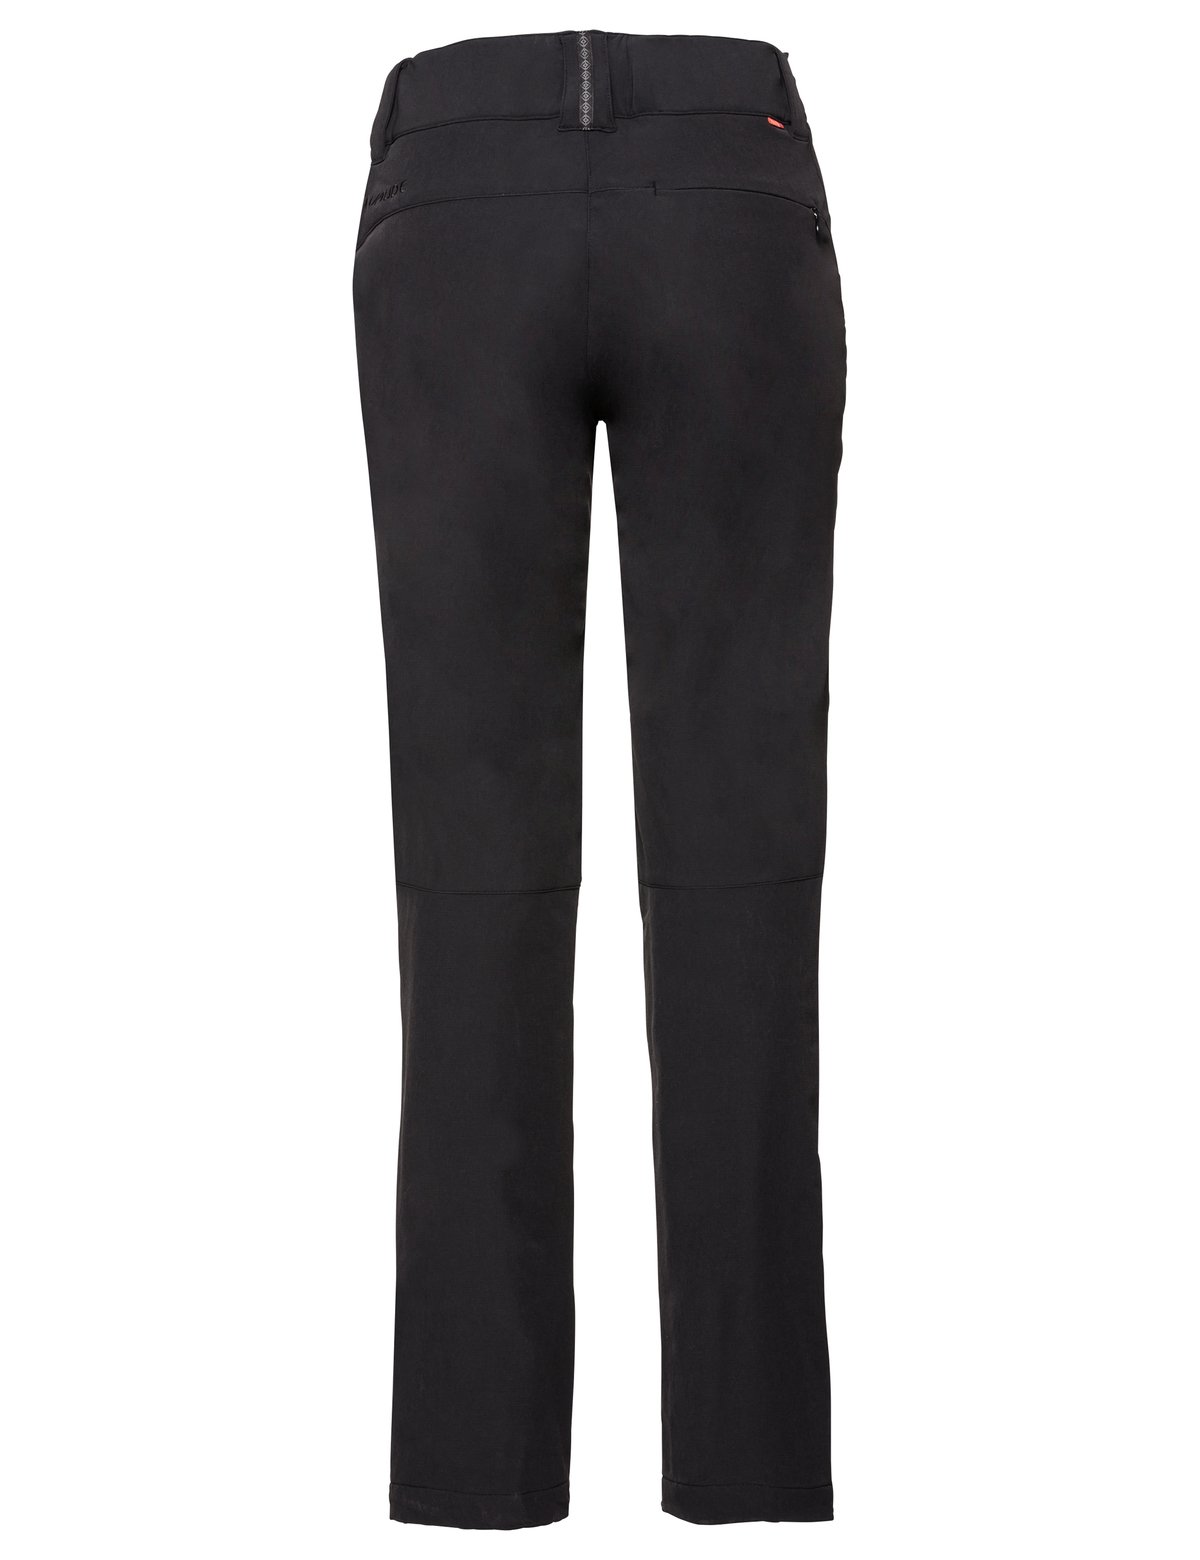 Vaude W's Skomer Winter Pants - Sustainable produced from Polyamide Black Pants